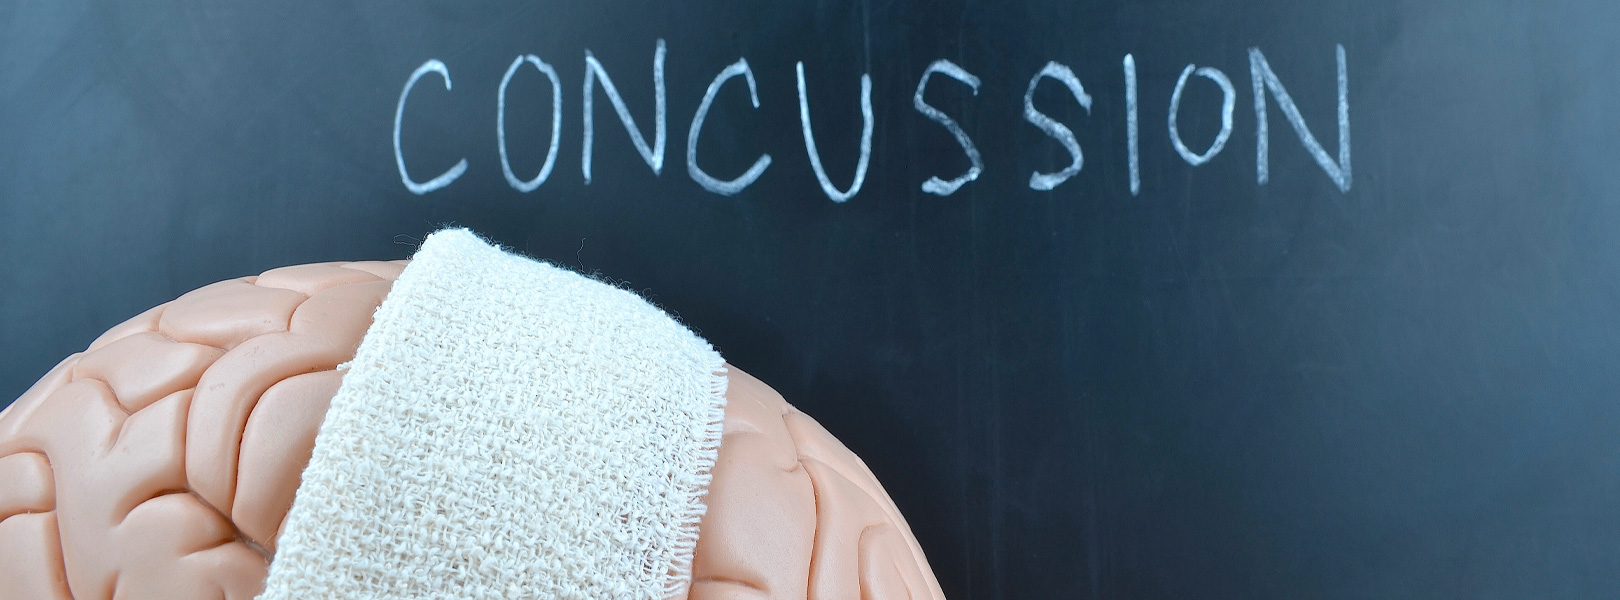 Concussion and bandaged brain